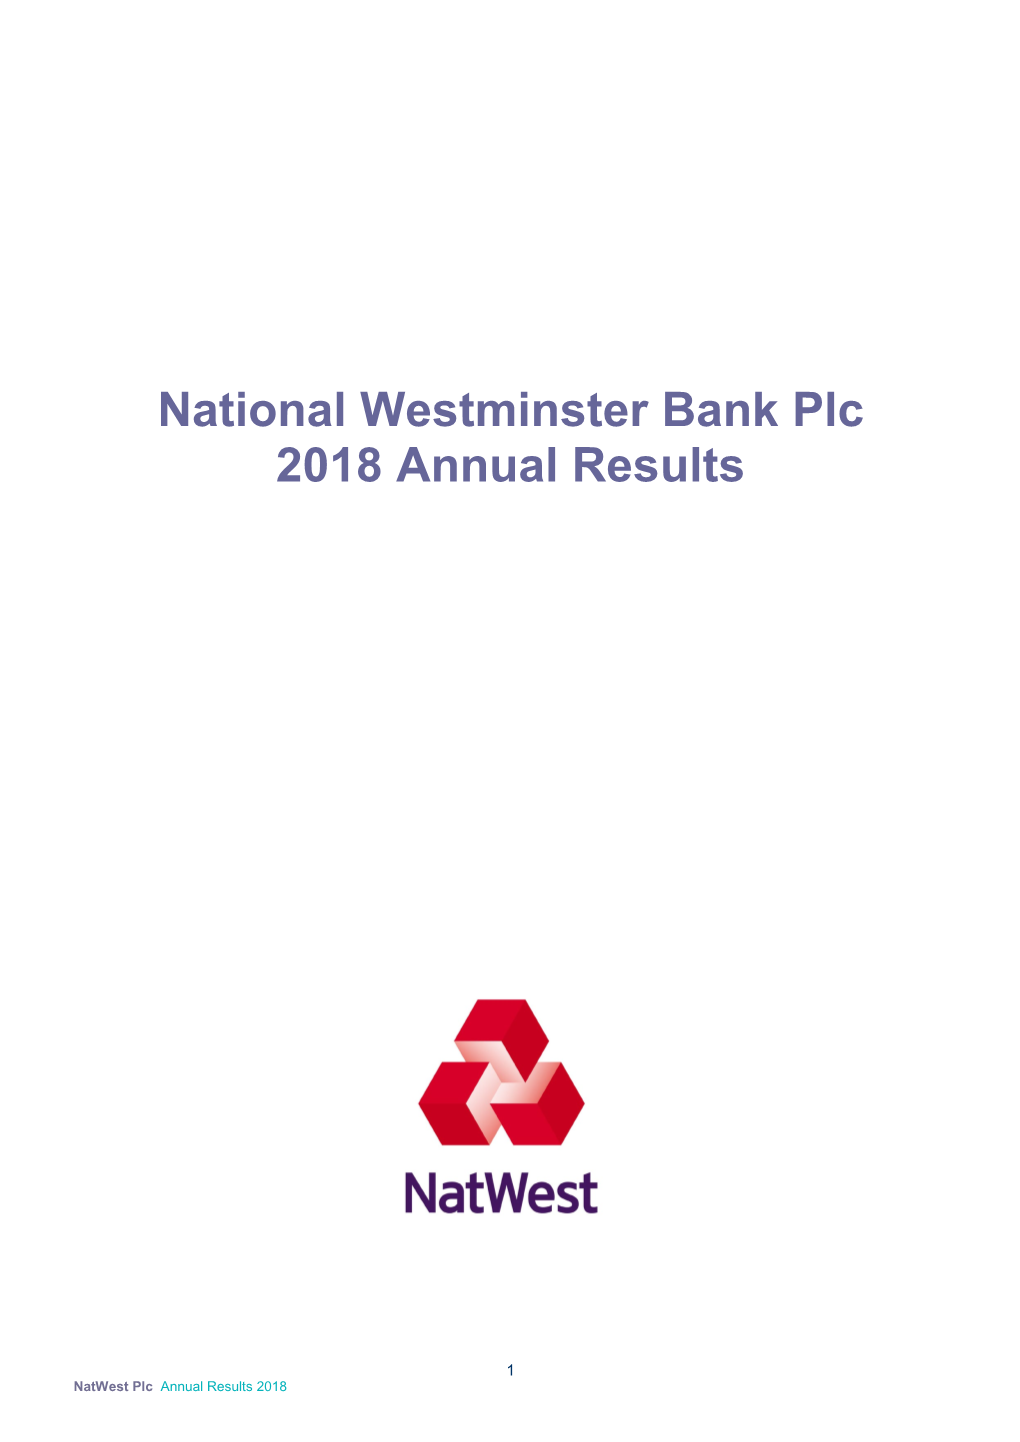 National Westminster Bank Plc 2018 Annual Results